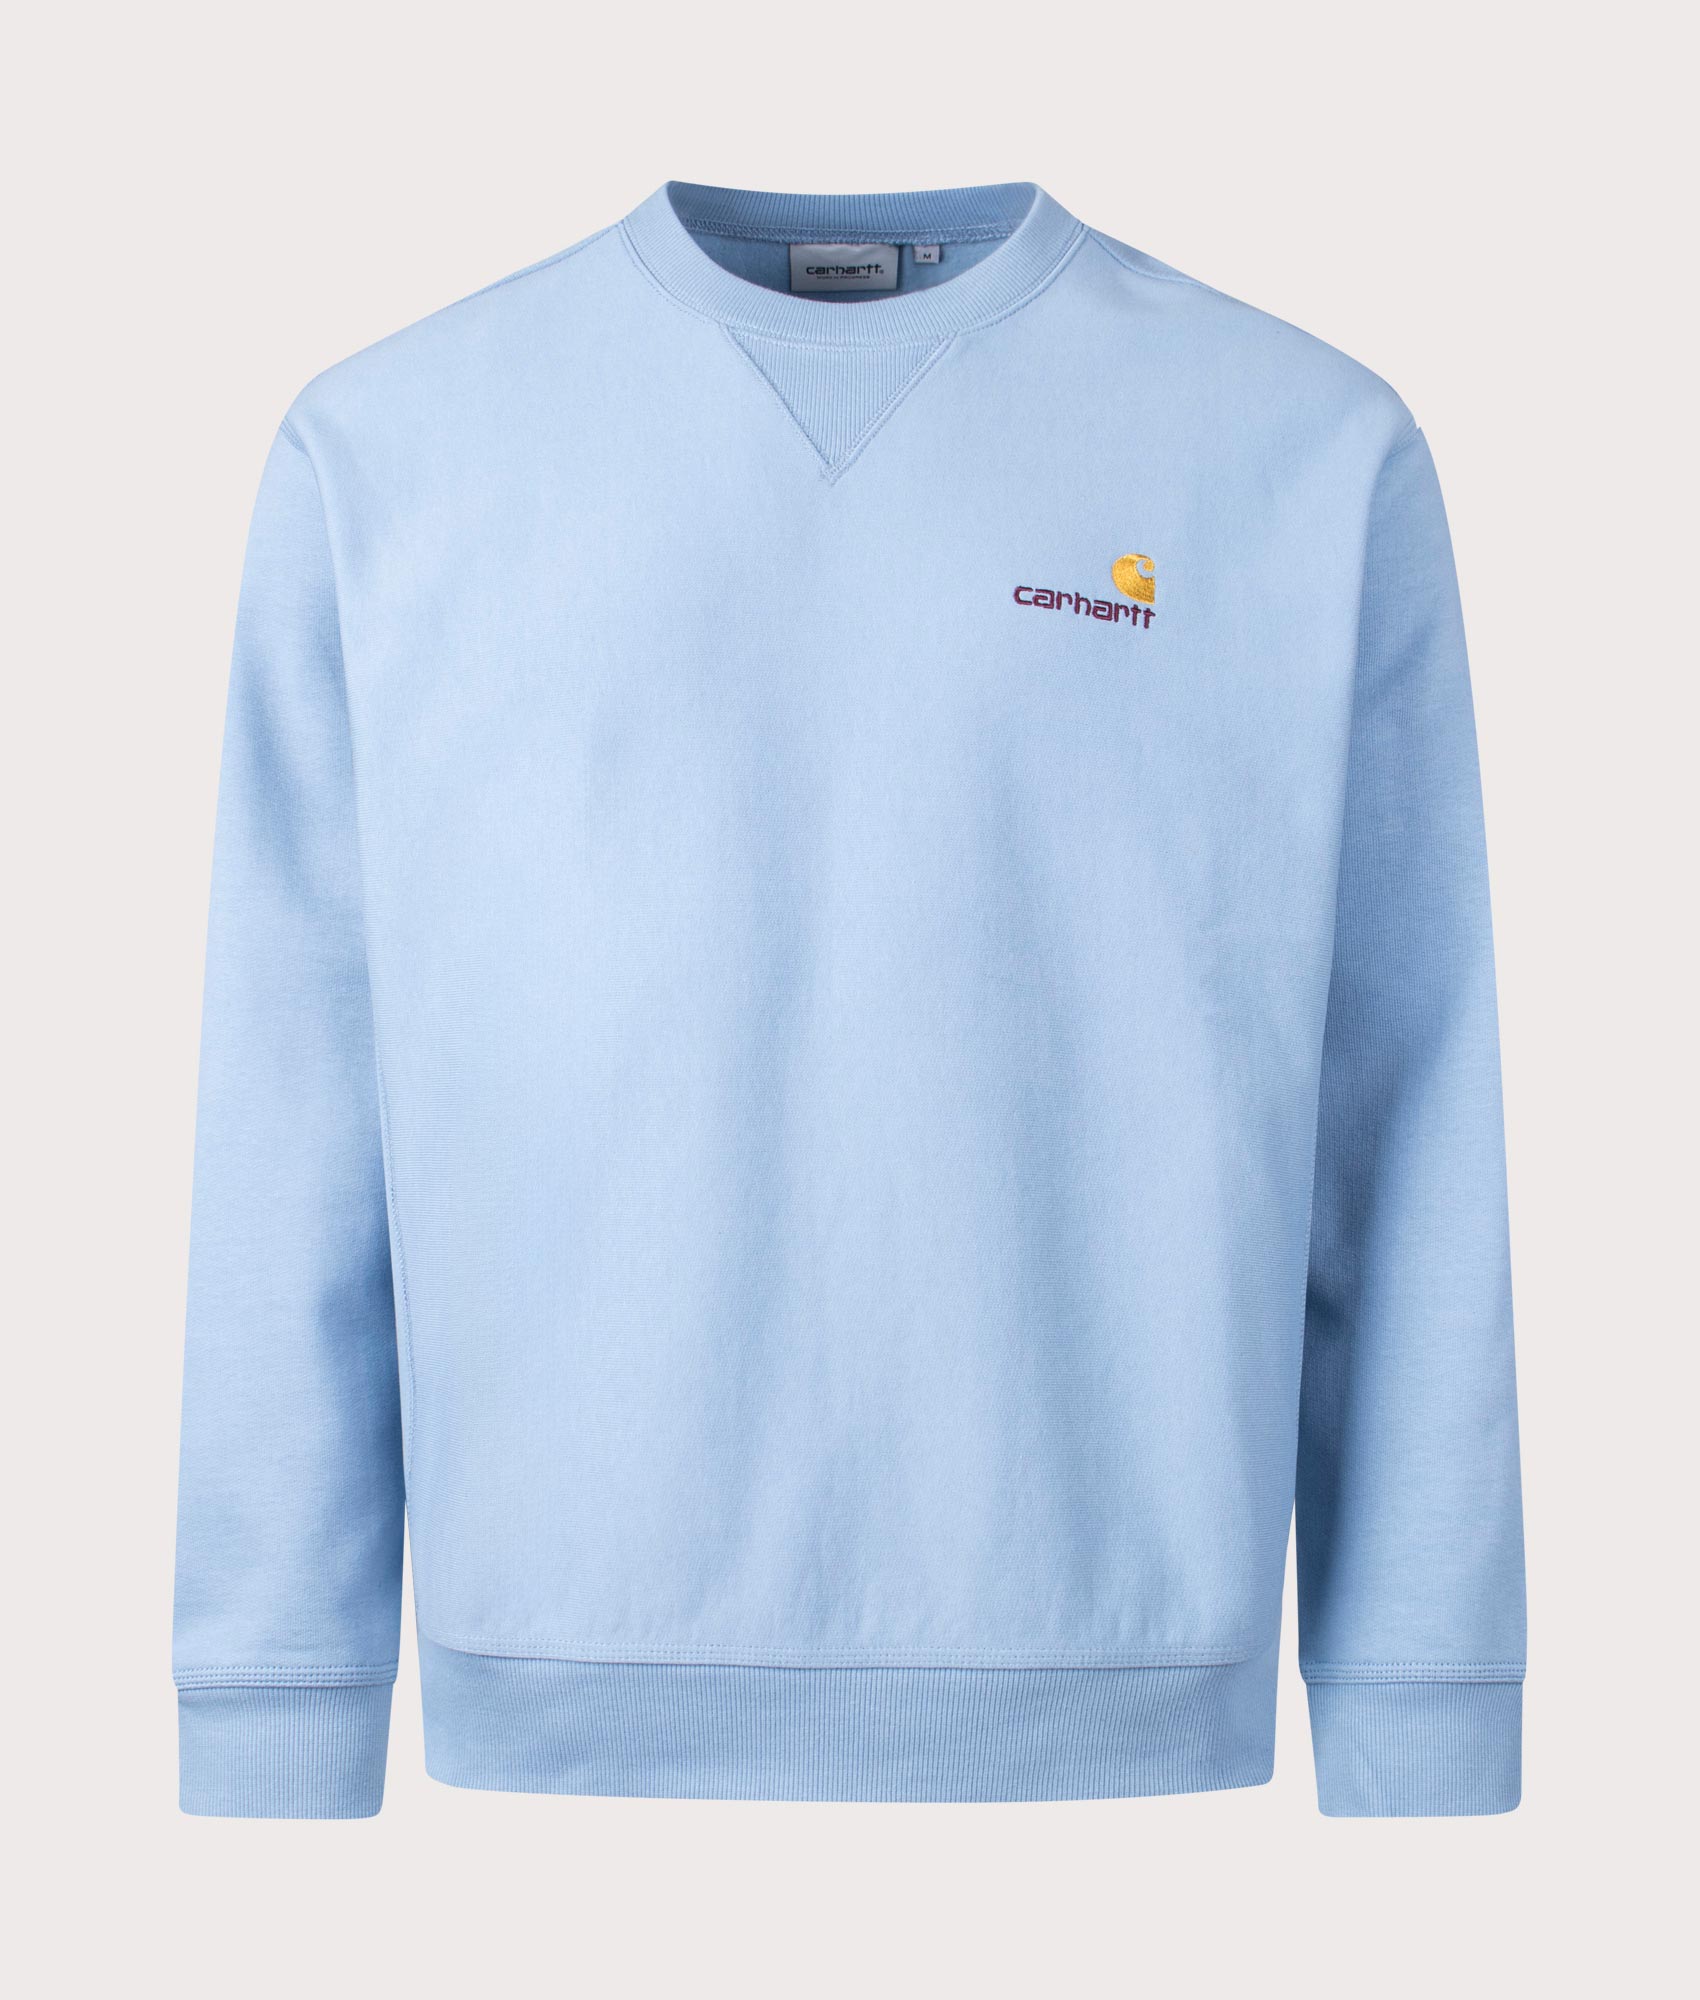 Carhartt WIP Mens Relaxed Fit American Script Sweatshirt - Colour: 0F4XX Frosted Blue - Size: Large